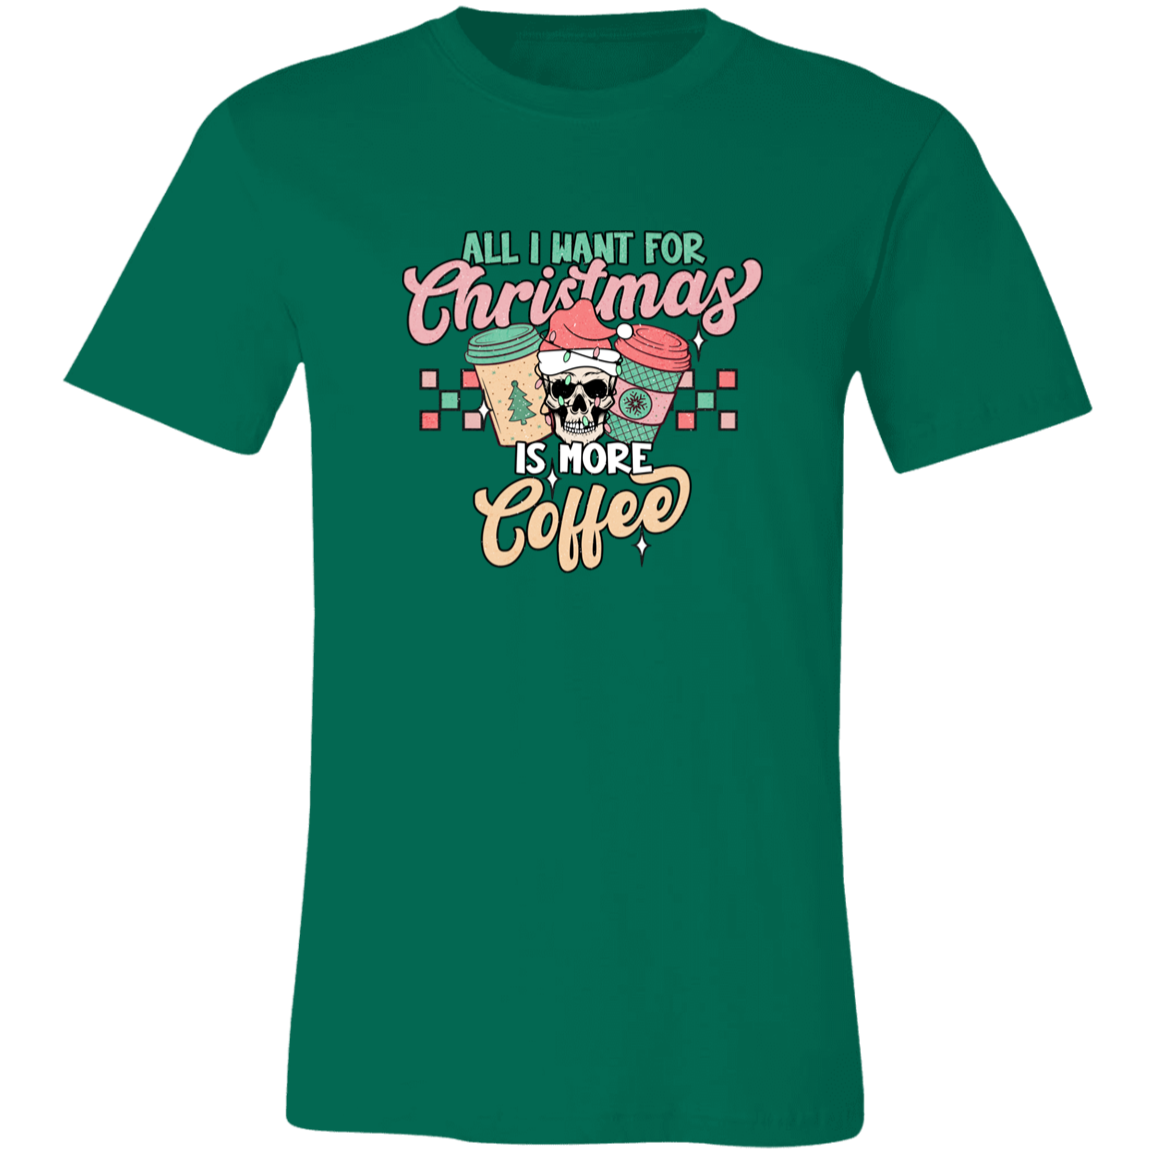 All I Want For Christmas Is More Coffee! Shirt